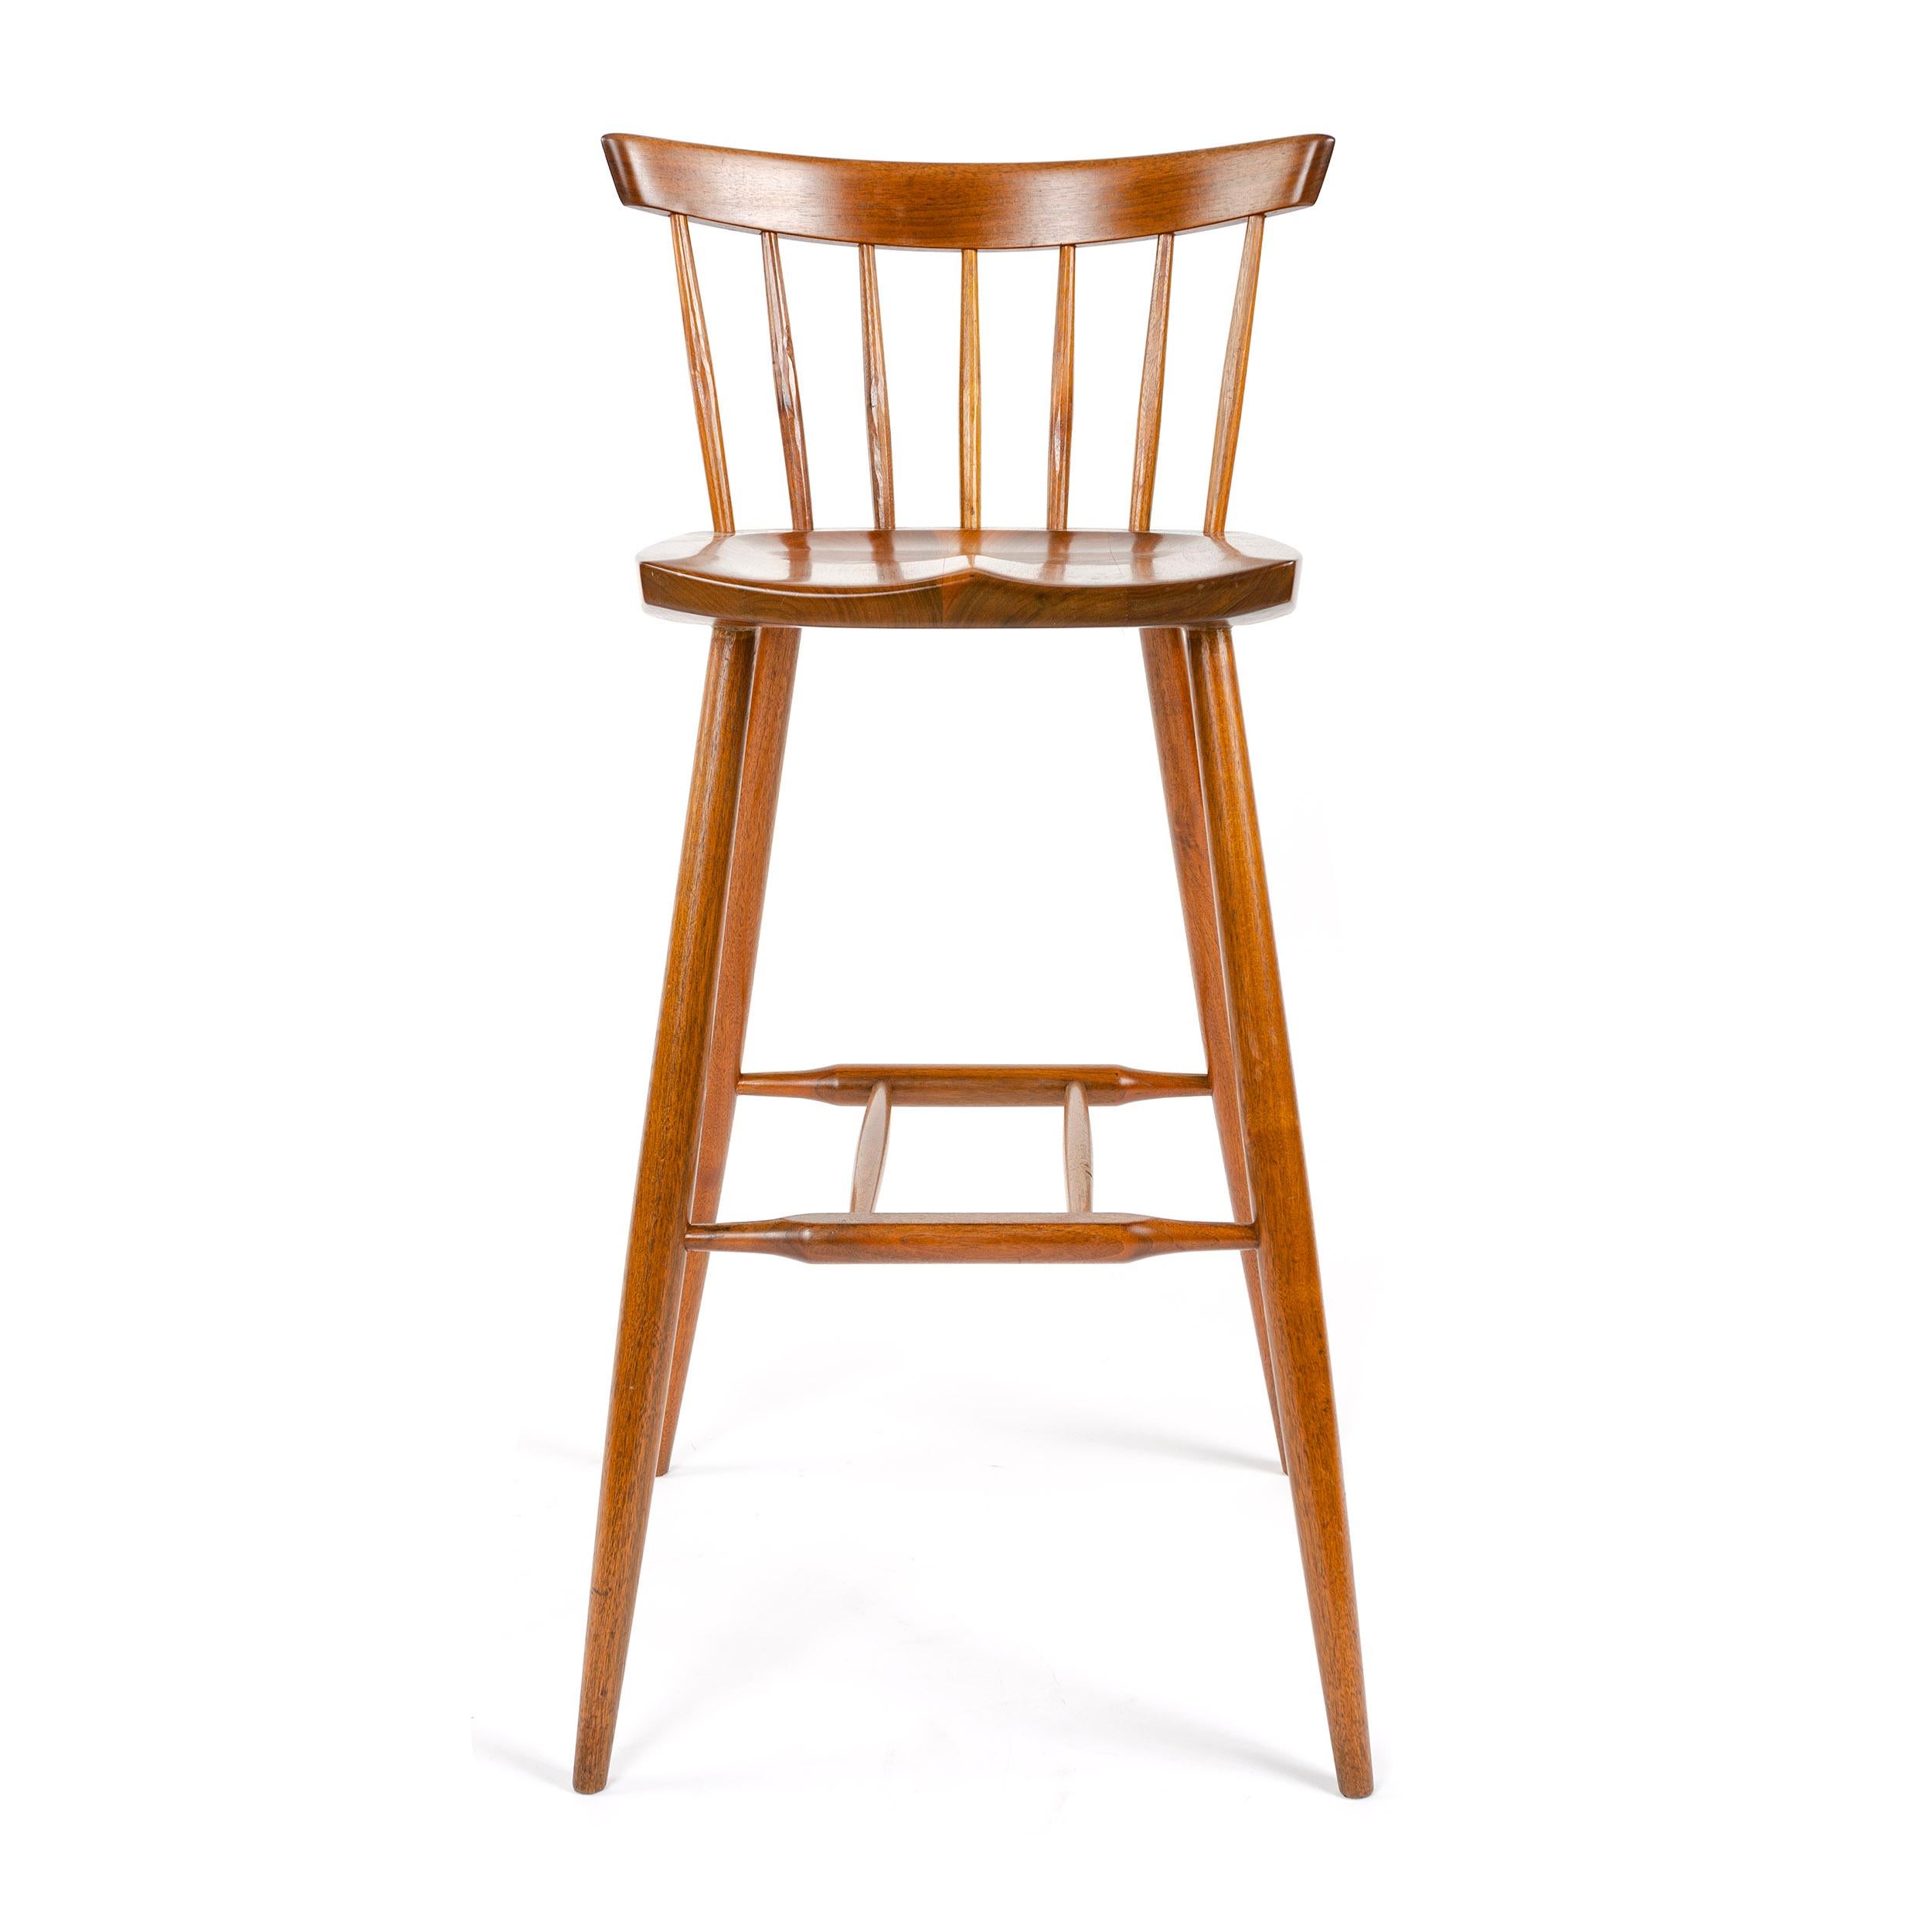 A walnut barstool designed by American Craftsman Master George Nakashima with hand-hewn spindles supporting a thin backrest, a shaped seat on four splayed, and tapered dowel legs with a footrest stretcher.
Made by the George Nakashima Studio in the